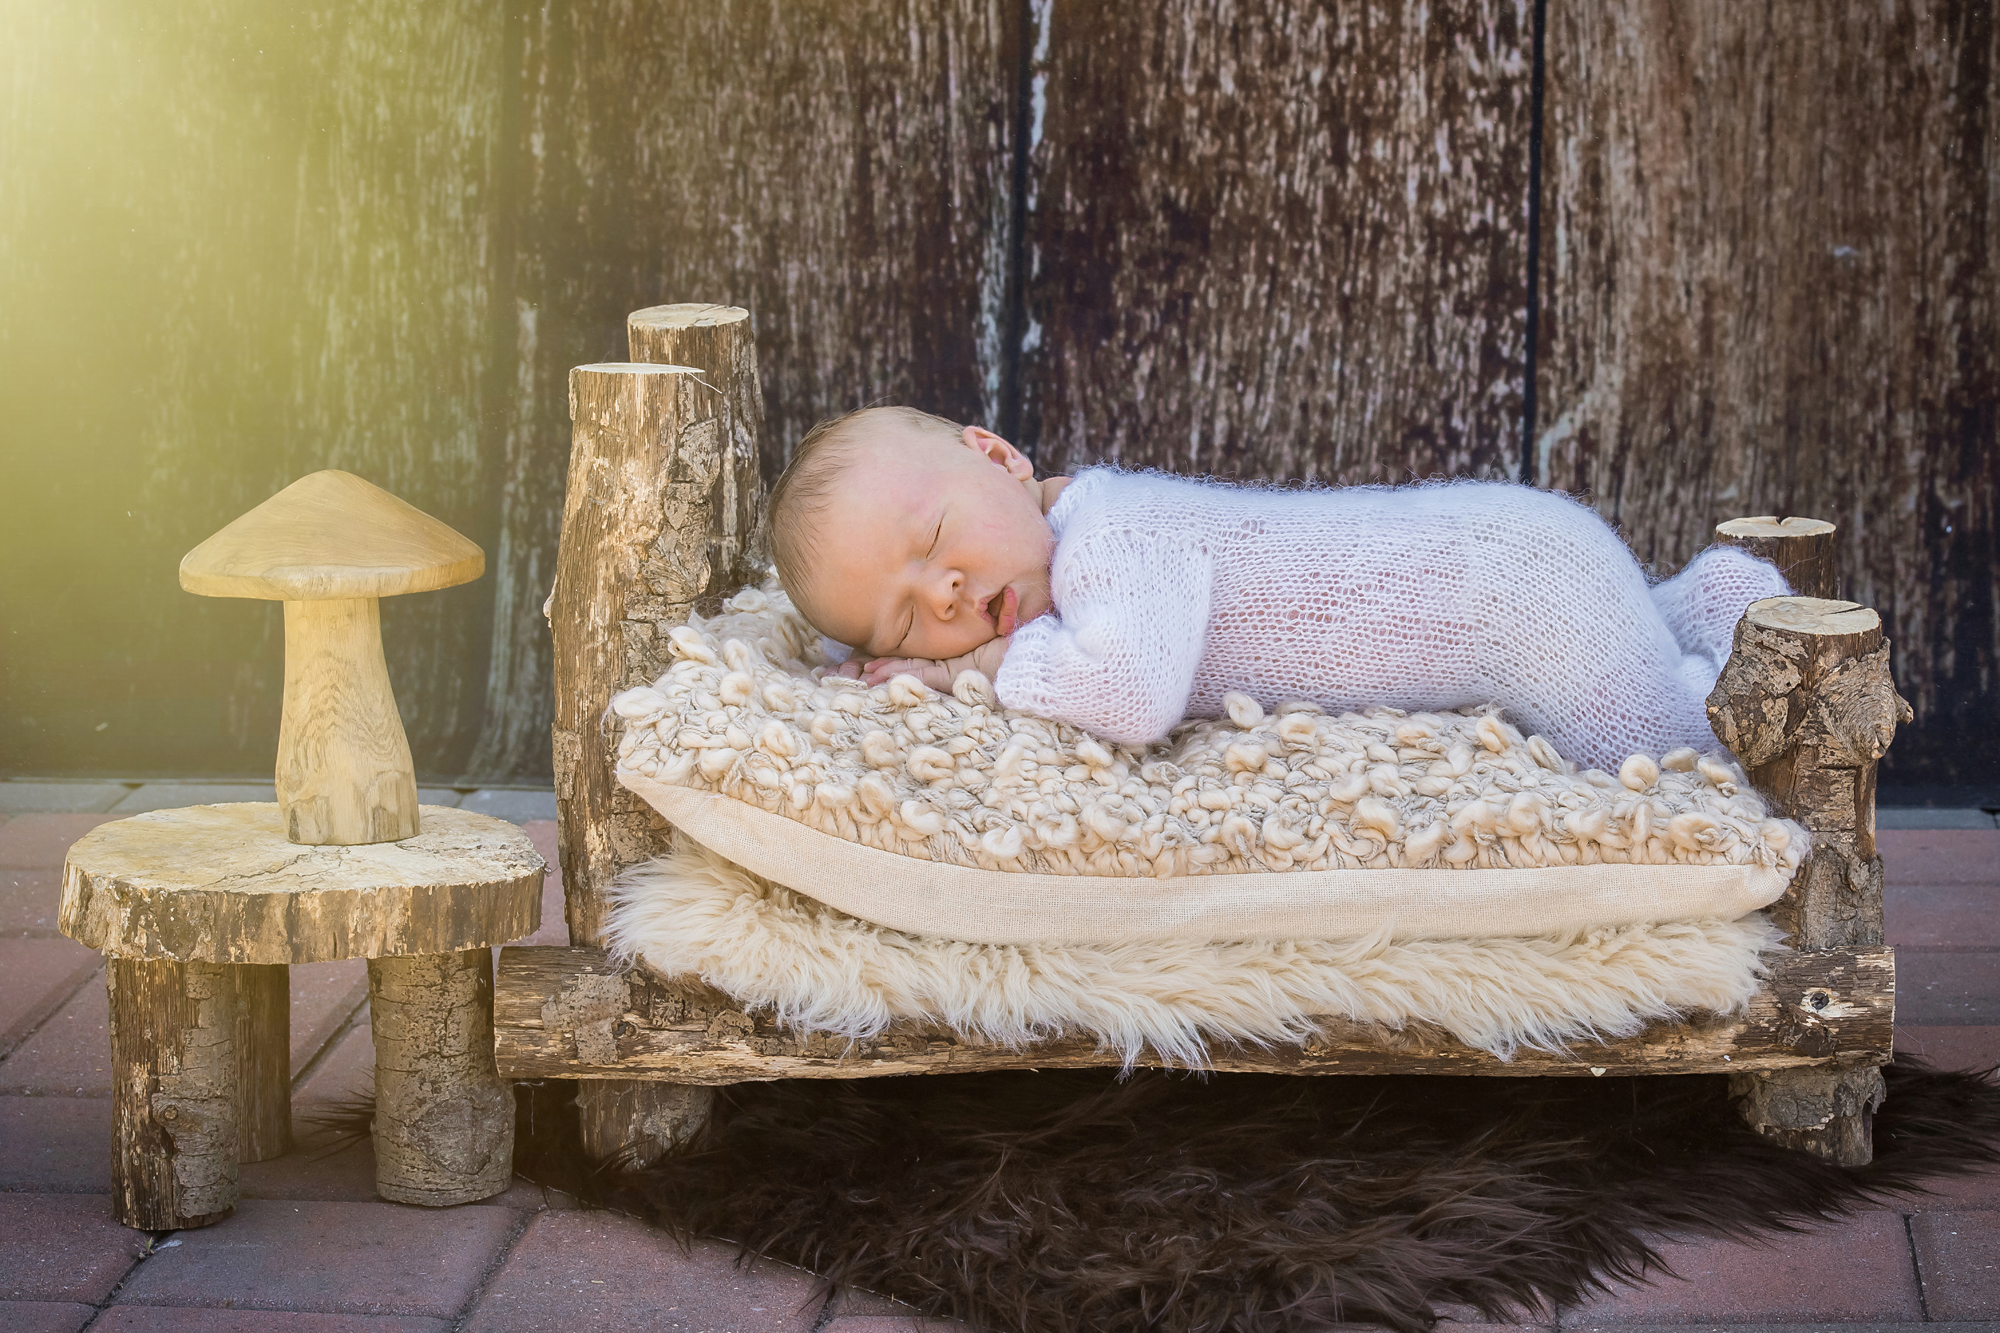 Infant Photographer in Cherry Hill New Jersey